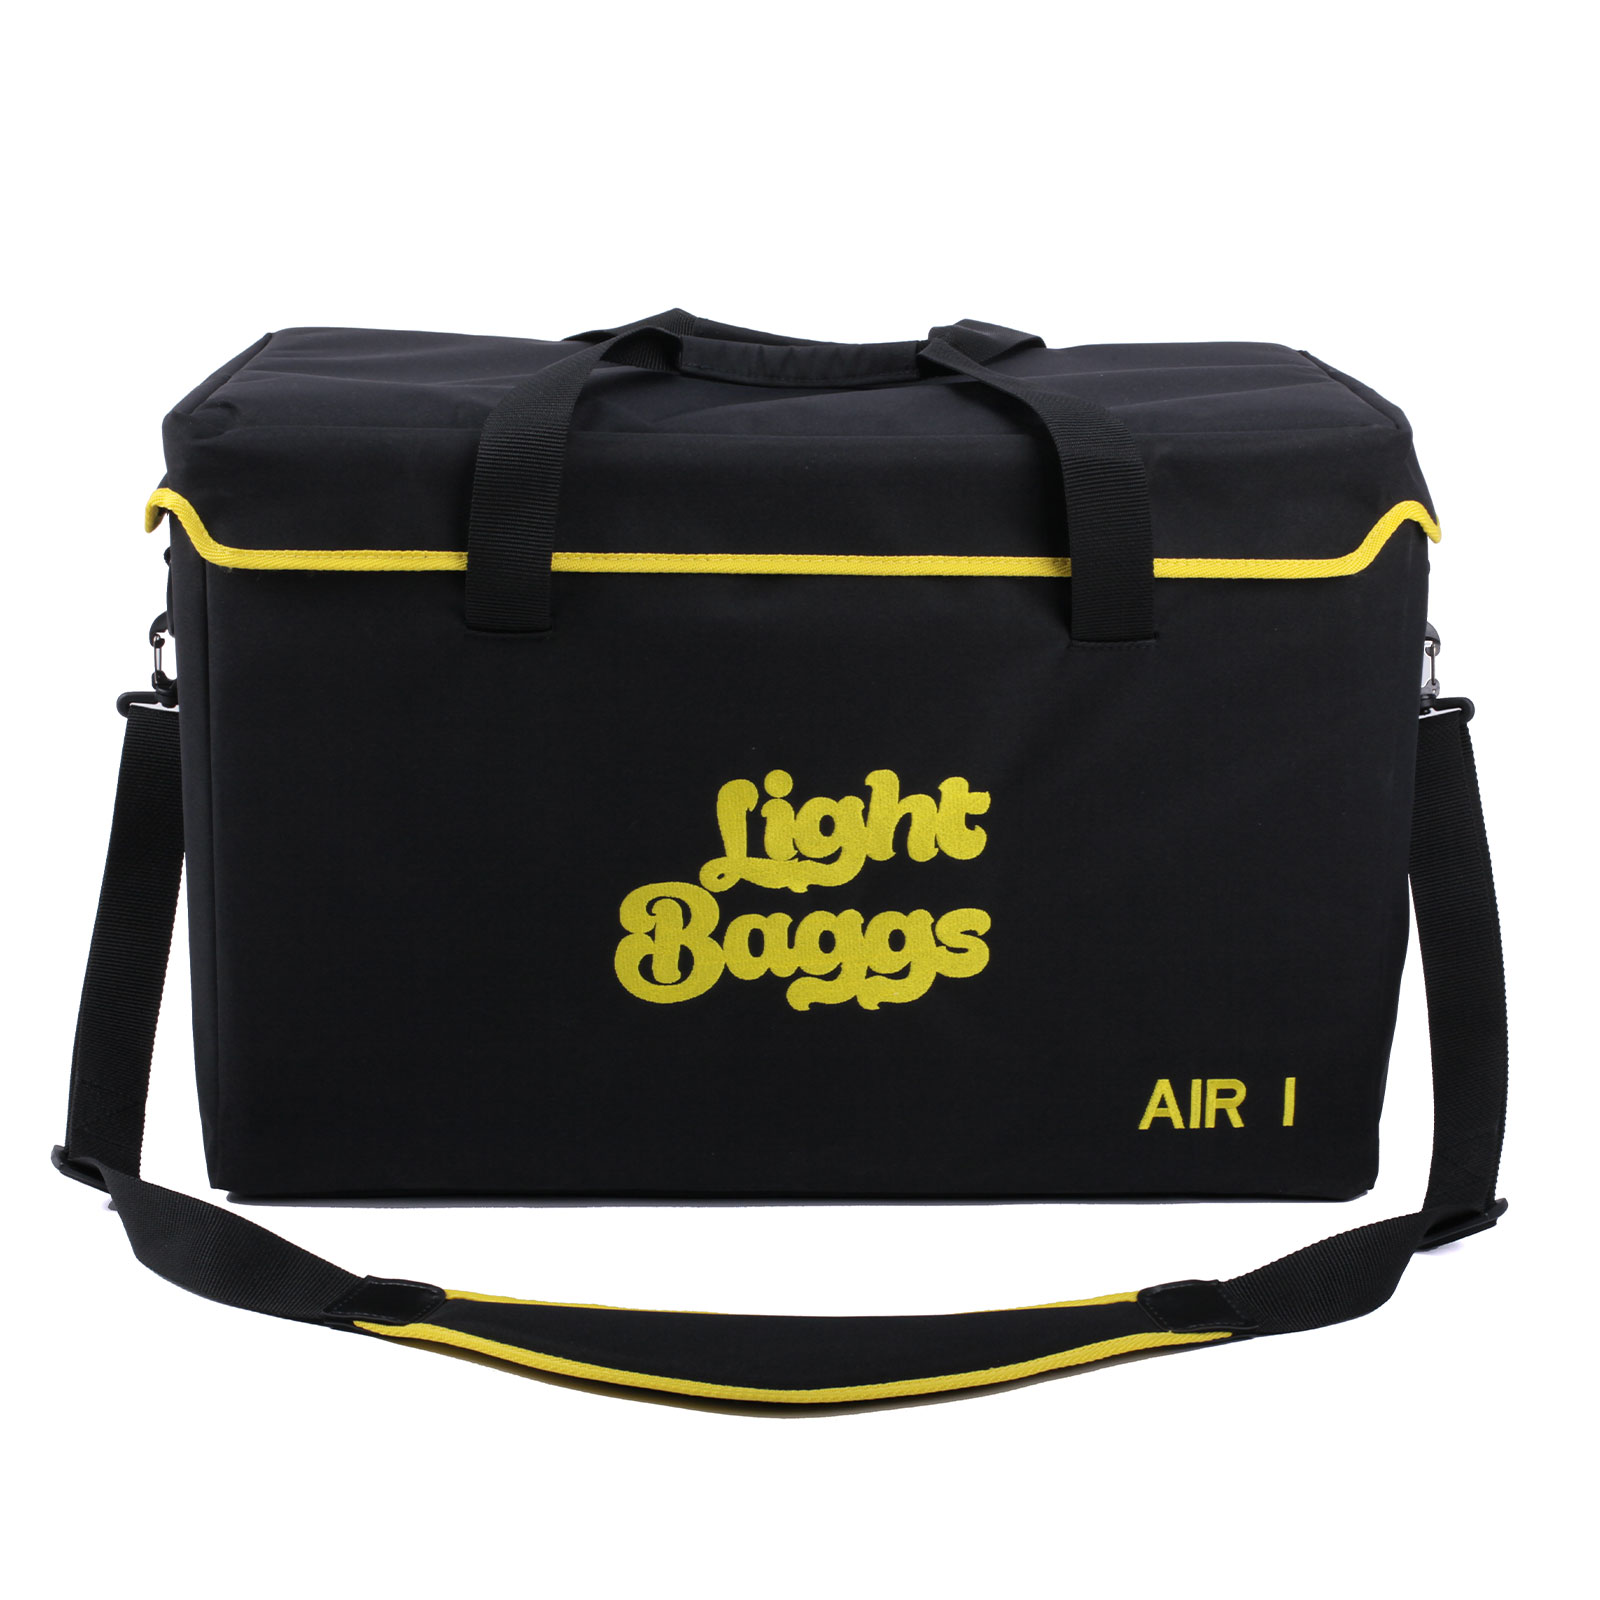 LightBaggs BAGG AIR1 with Velcro